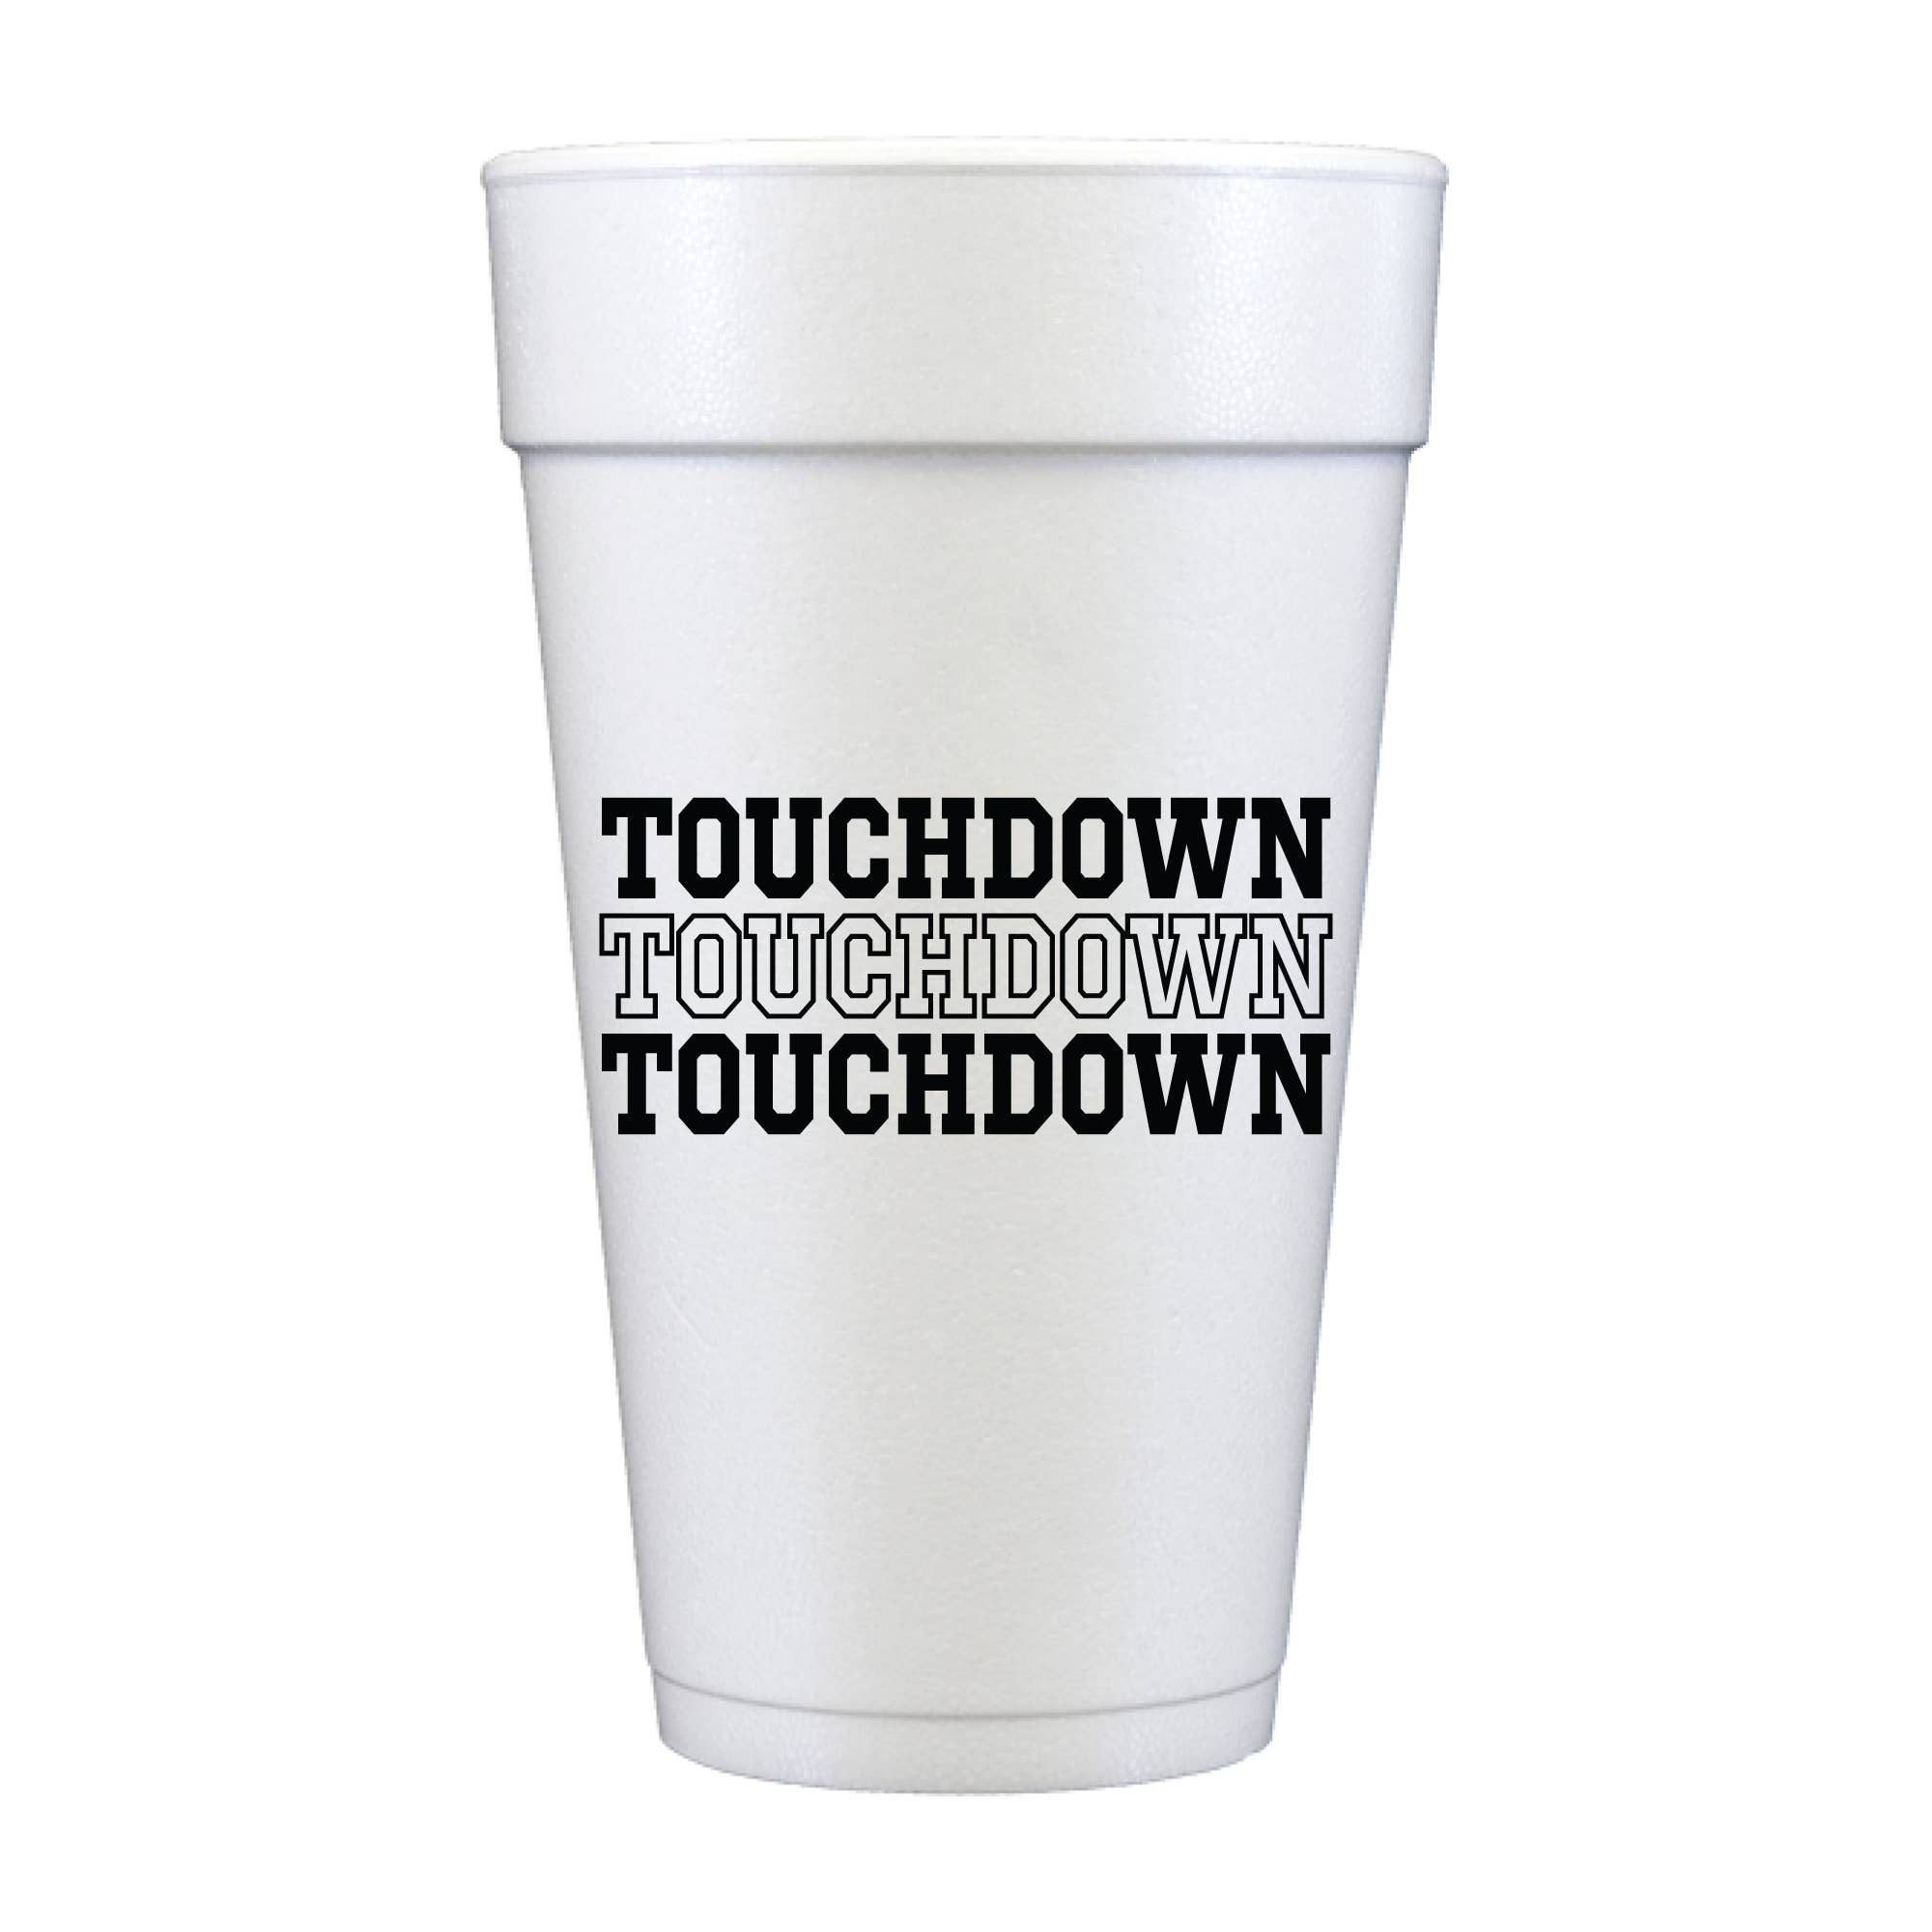 Touchdown Football Tailgate Foam Party Cups